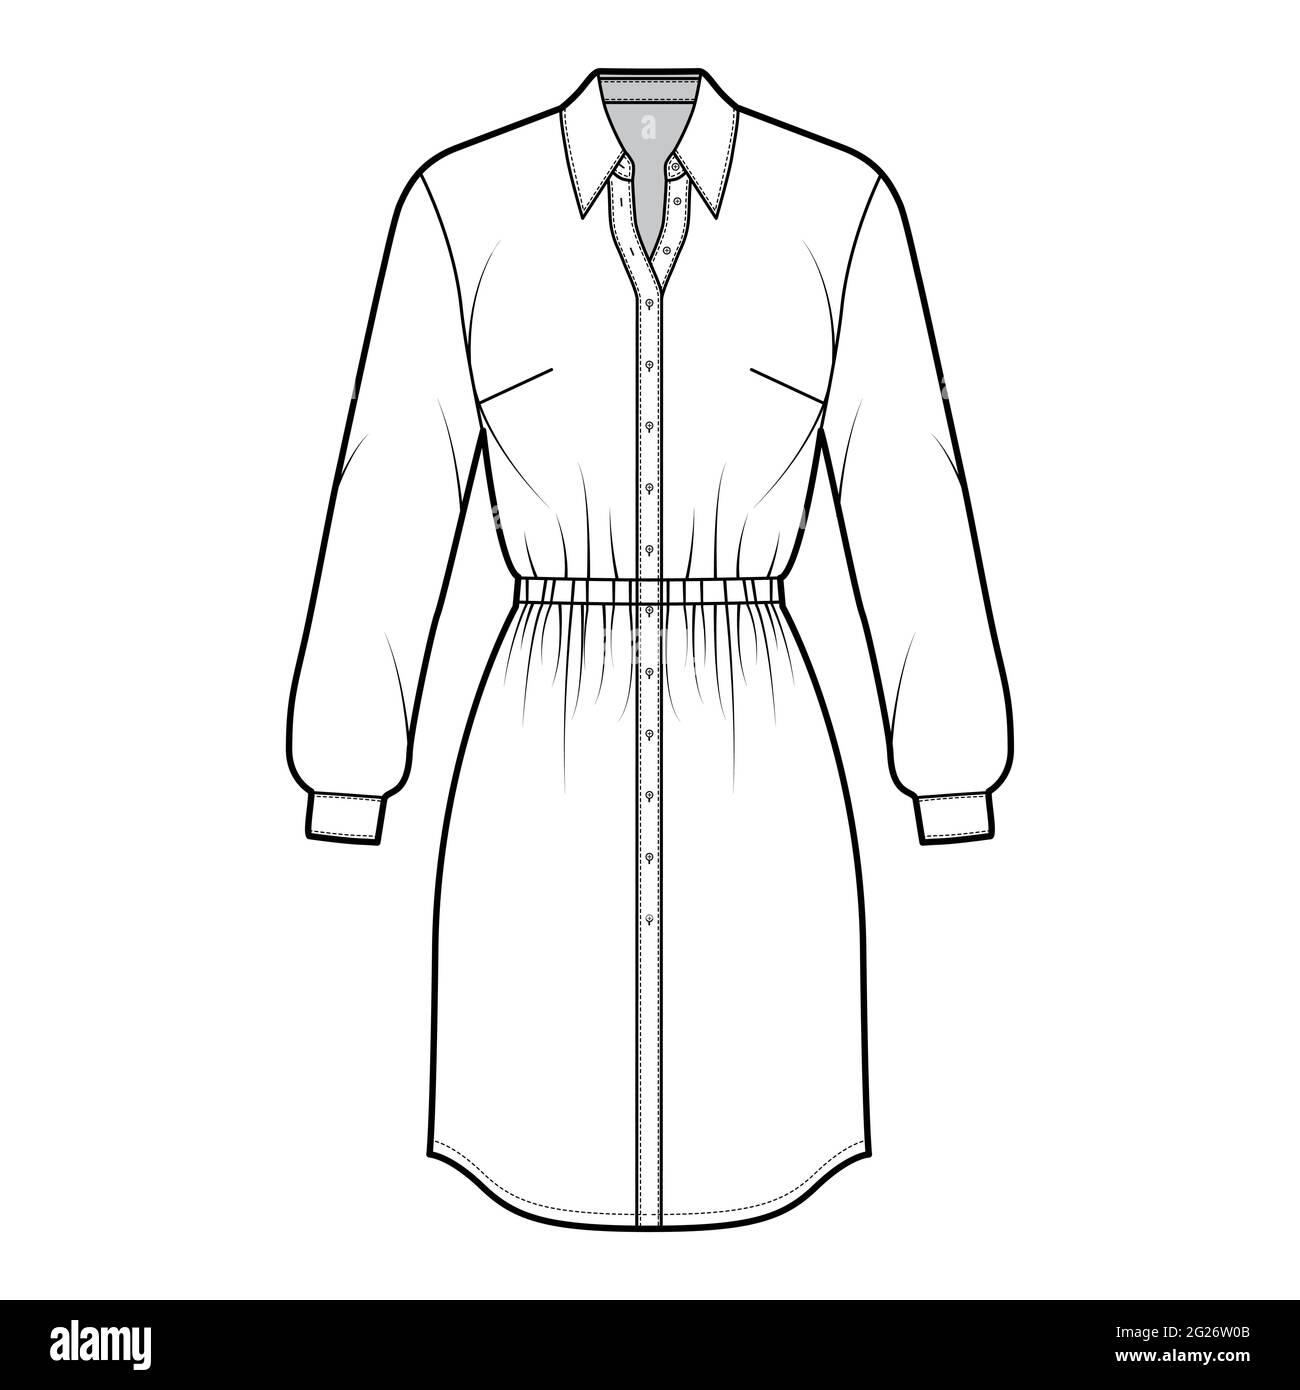 Dress shirt technical fashion illustration with gathered waist, long sleeves, fitted, pencil skirt, classic collar, button closure. Flat apparel front, white color style. Women, men unisex CAD mockup Stock Vector